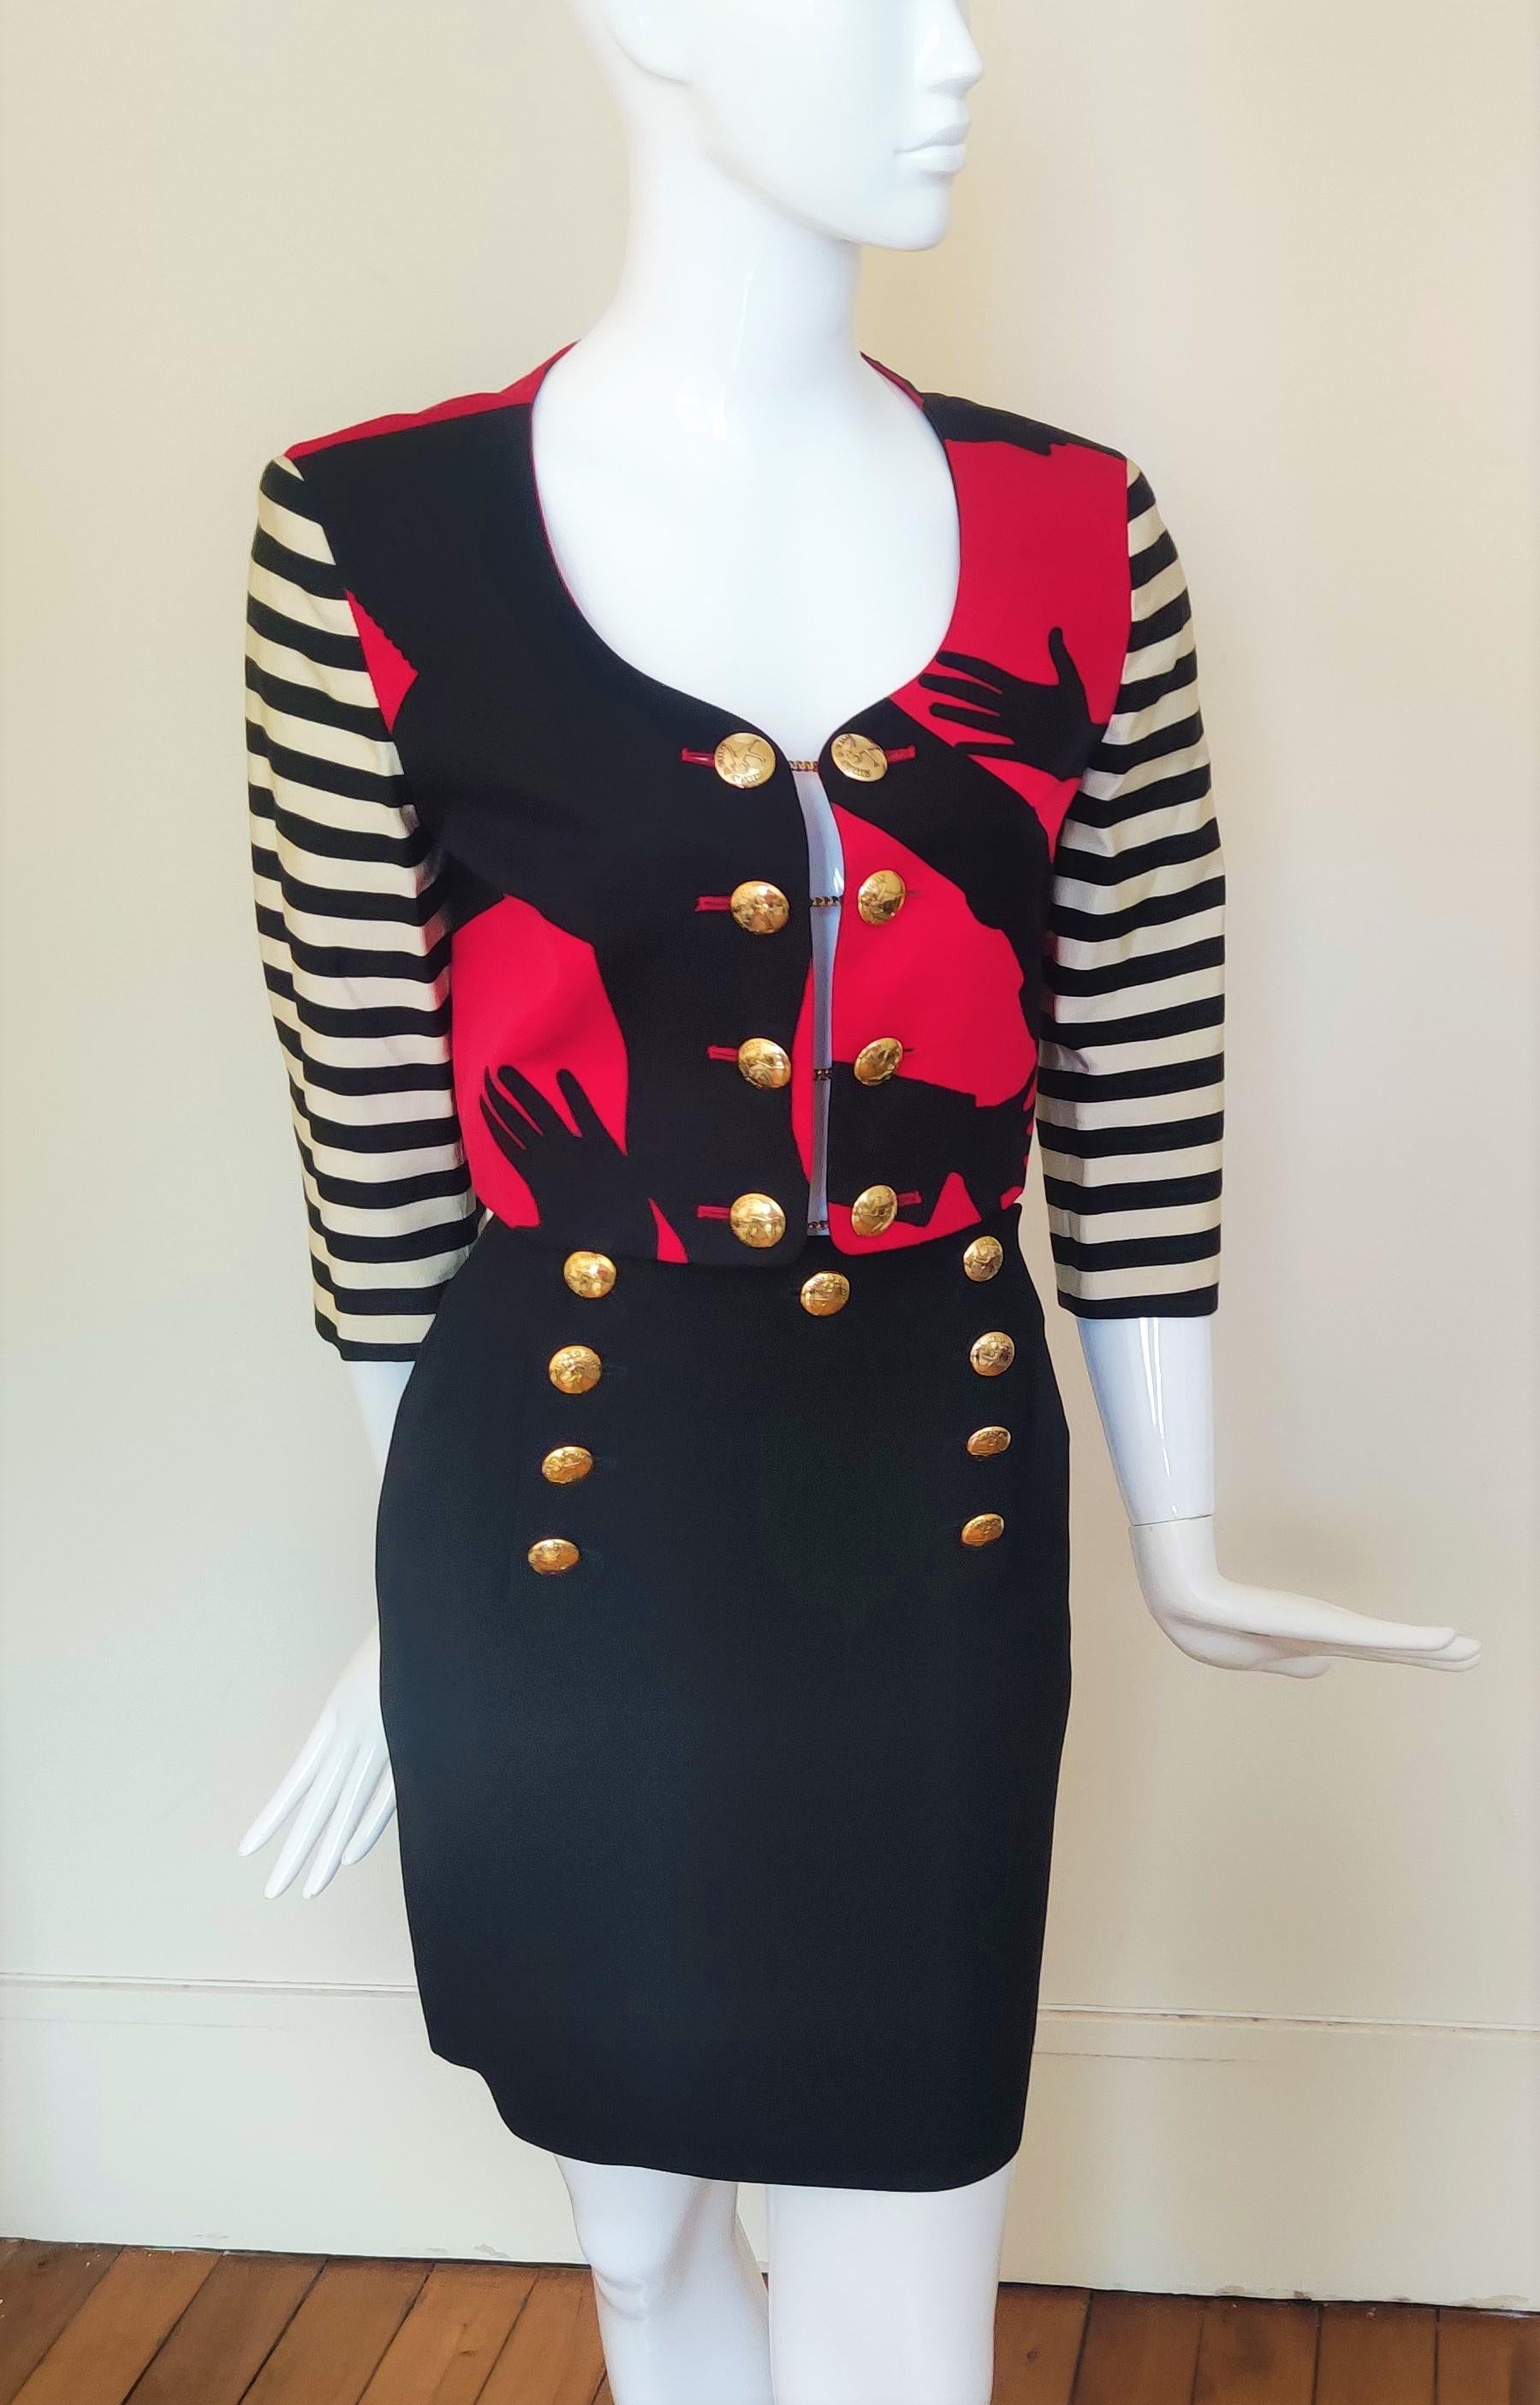 Moschino Cheap and Chic Olive Oyl Popeye Arms Legs Shadow The Nanny Couture Suit For Sale 3